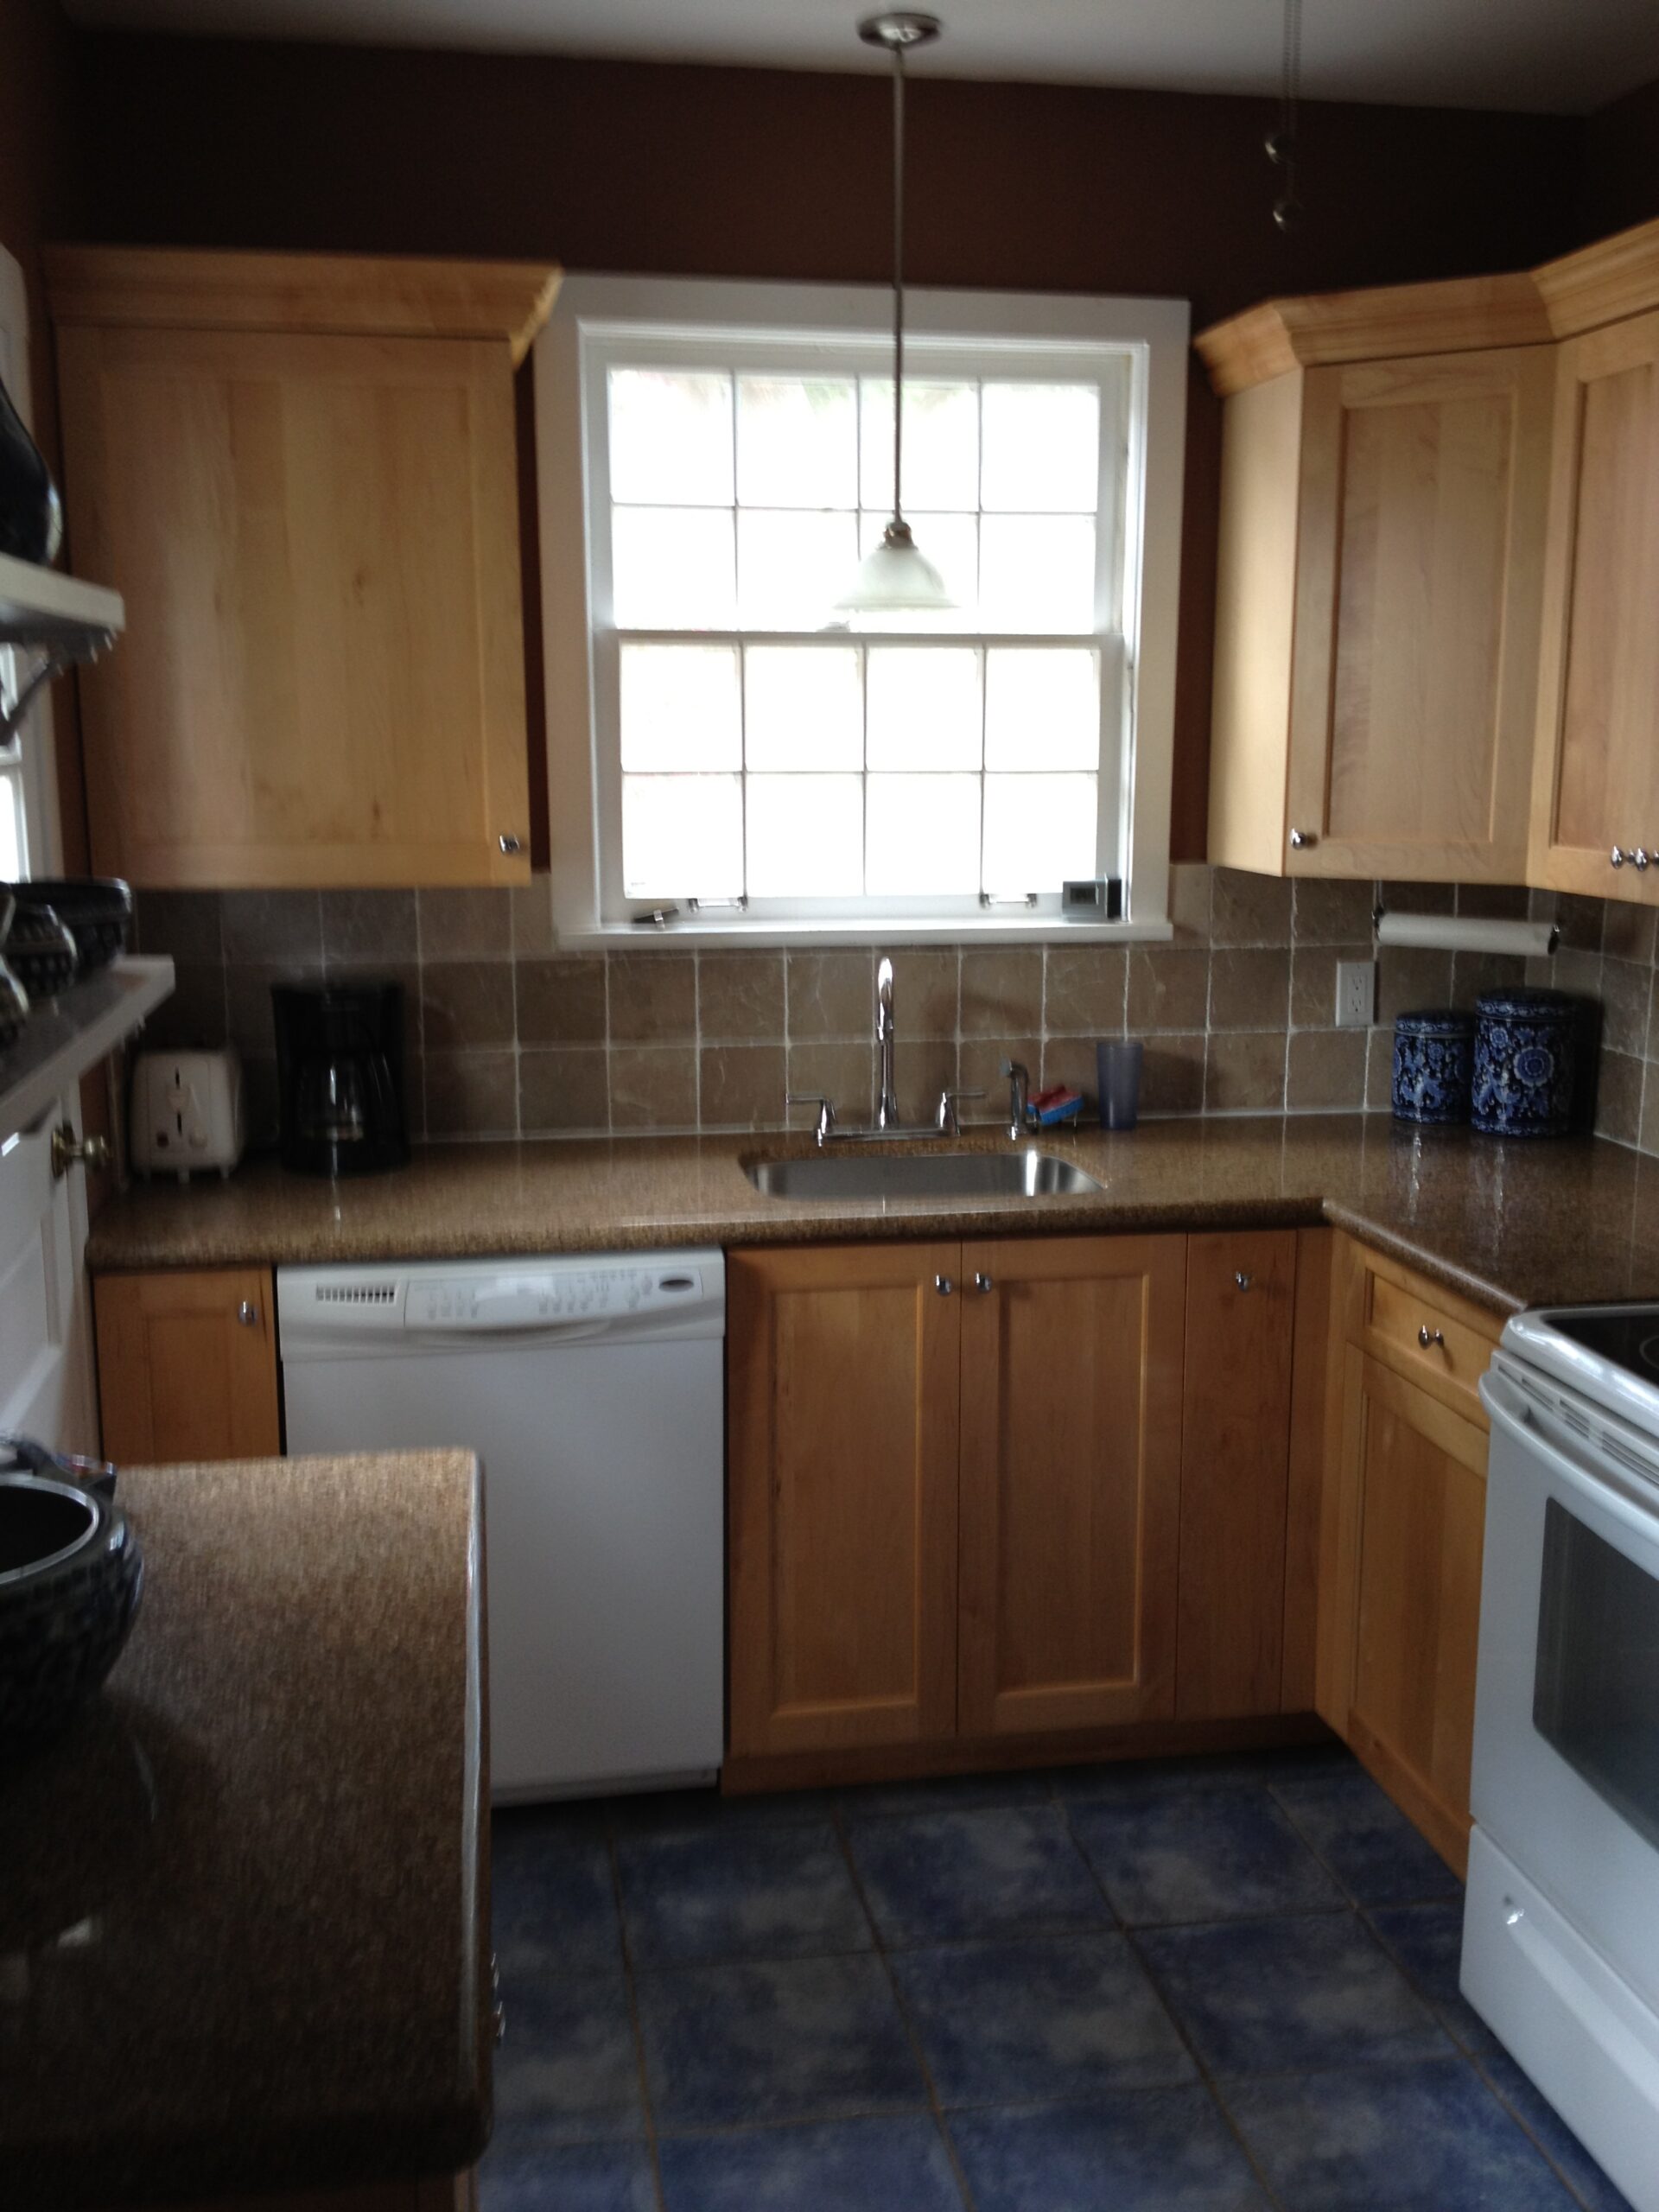 Kitchen: Before. Blue tile, brown speckled countertops, tan backsplash, natural wood cabinets, white appliances, brown walls....this room needed some love! 